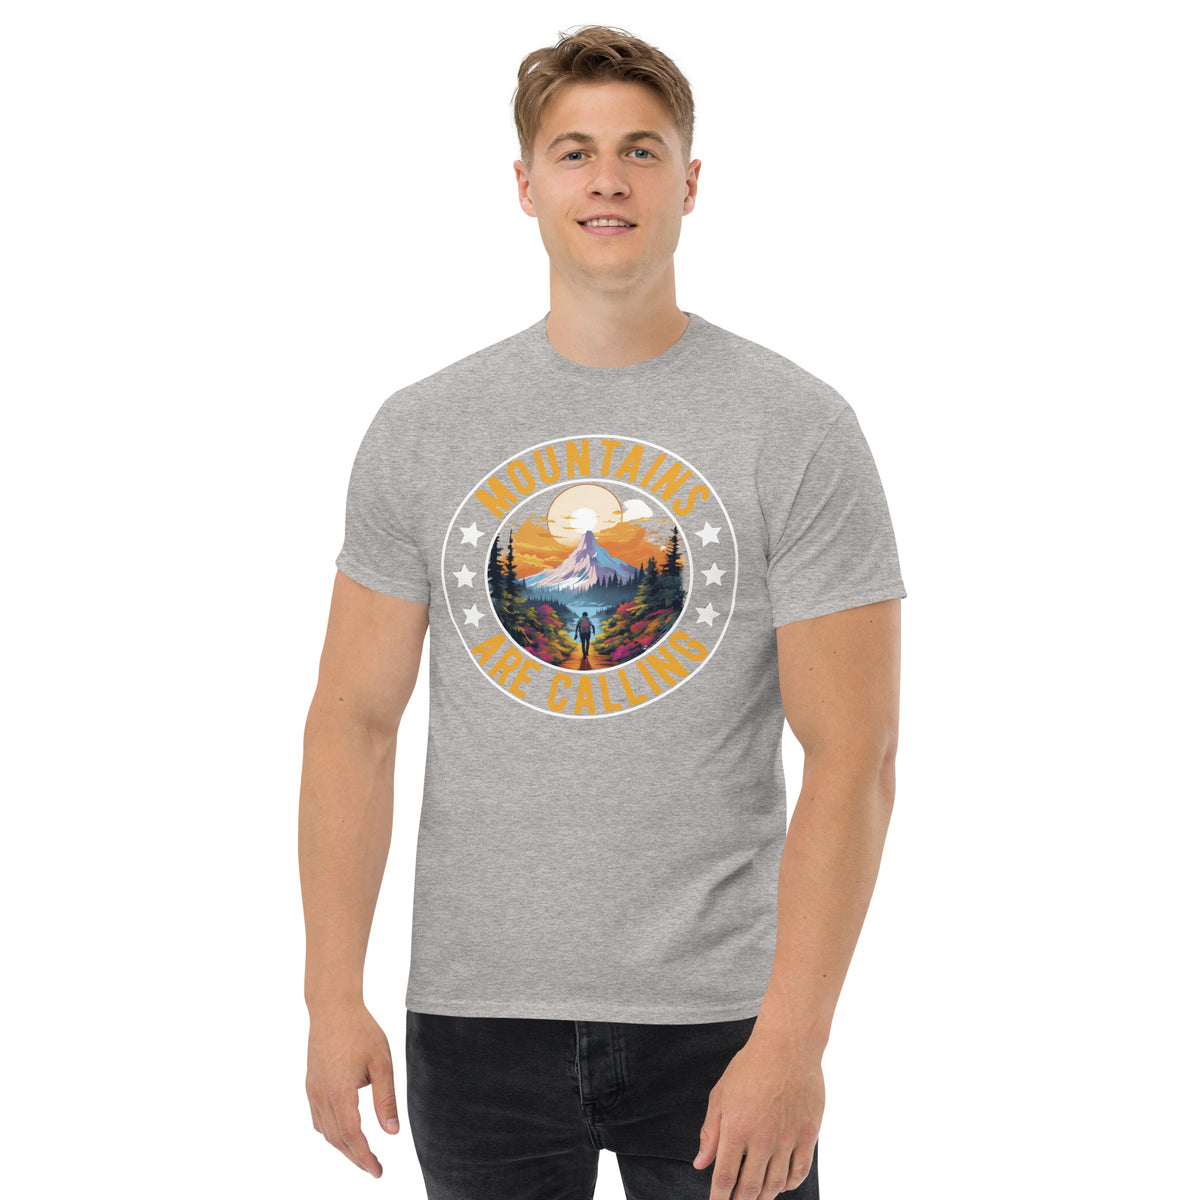 T-Shirt Outdoor & Wandern "Mountains are calling " Variante 5